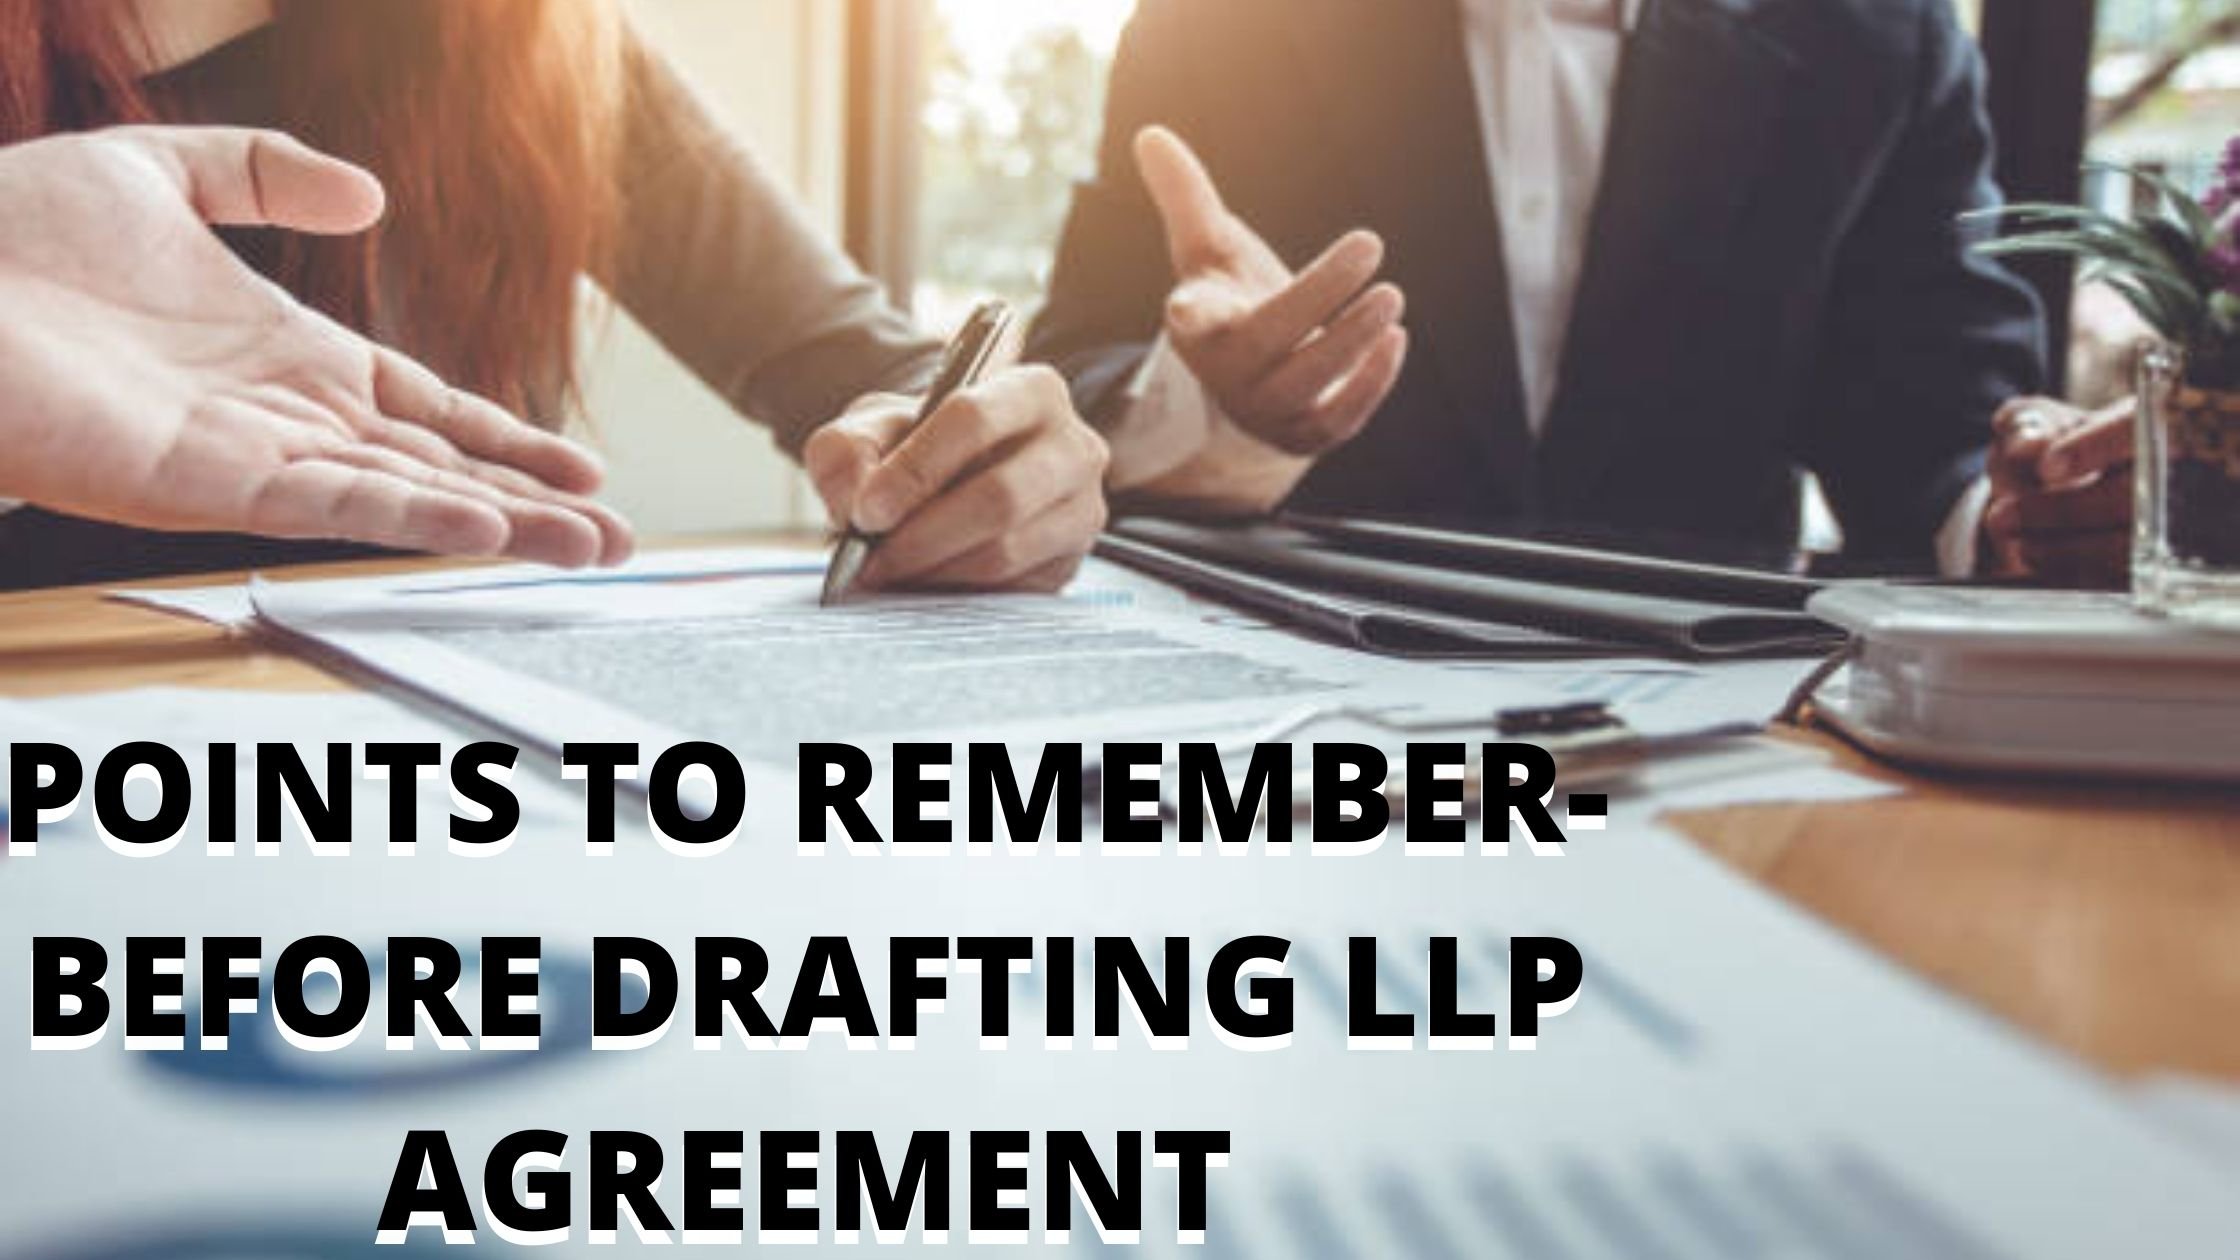 Consider these points before you Draft your LLP Agreement